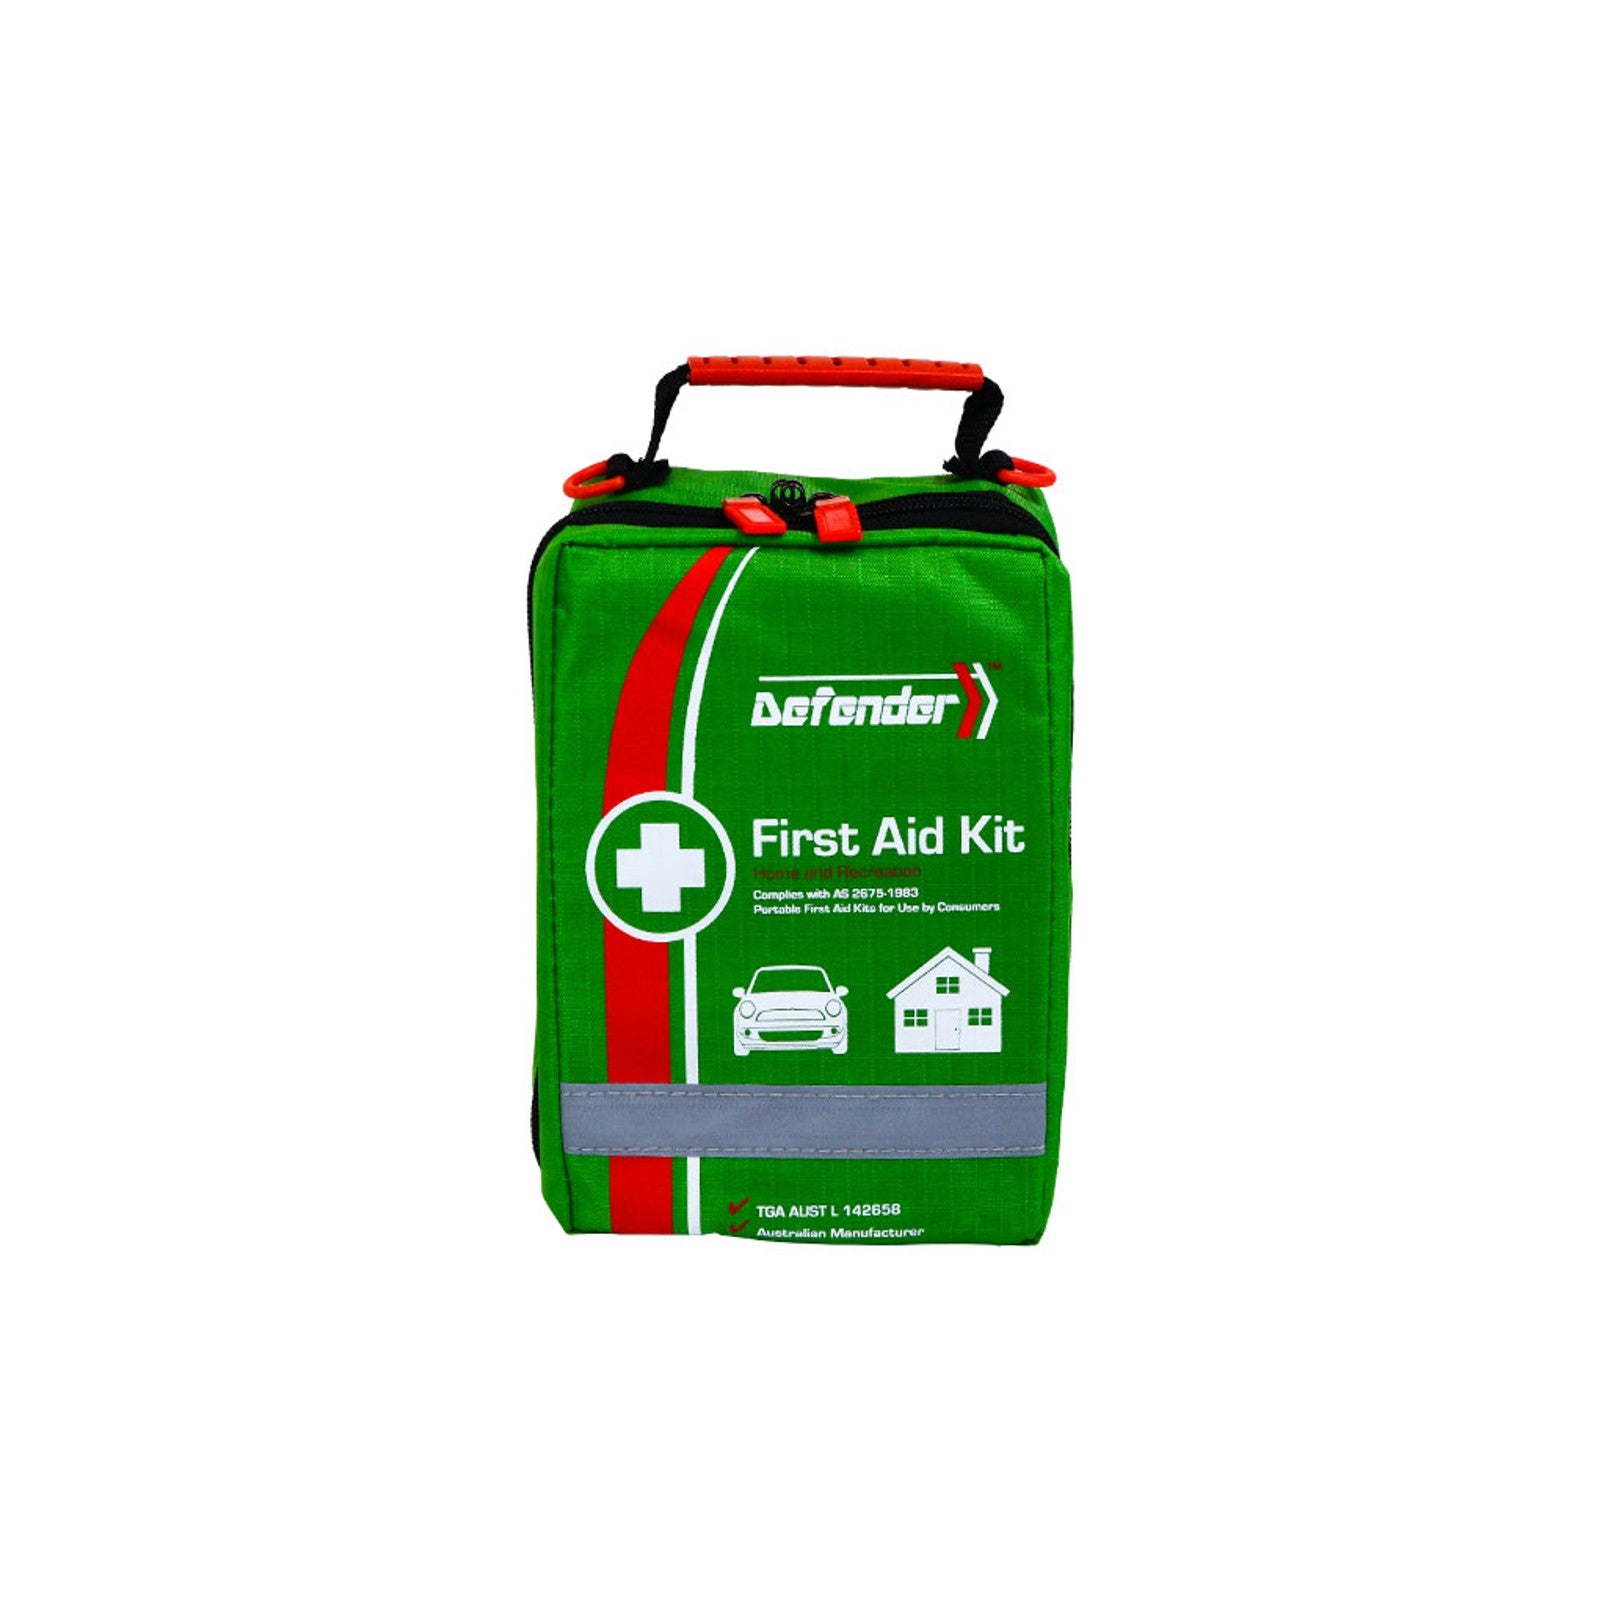 Softpack Versatile First Aid Kit